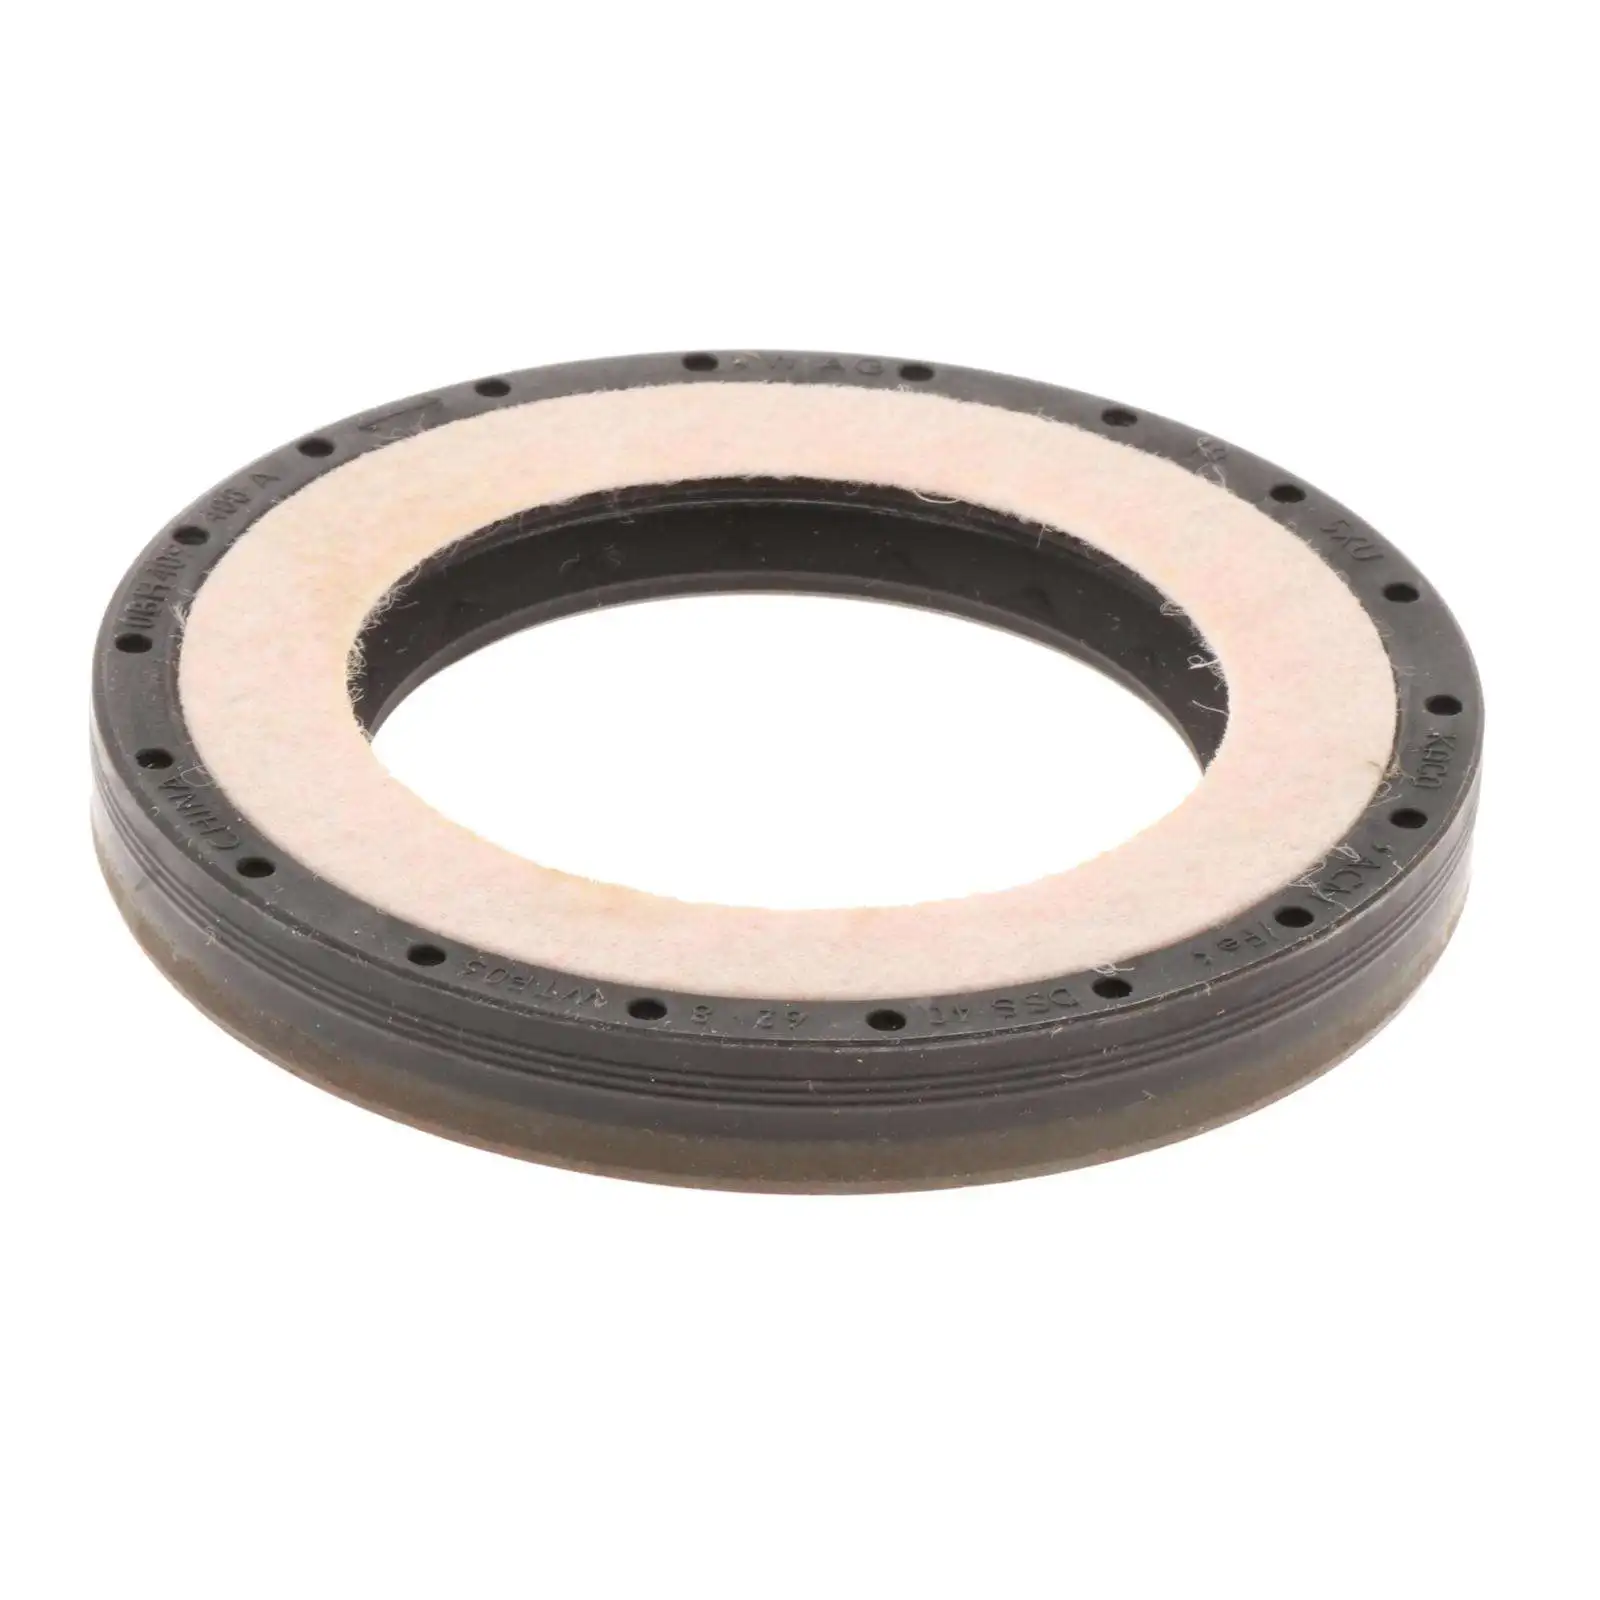 Automatic Transmission Half Shaft Oil Seal for Lingdu Easy to Install High Performance Direct Replaces Fit for Audi A3 Golf 7